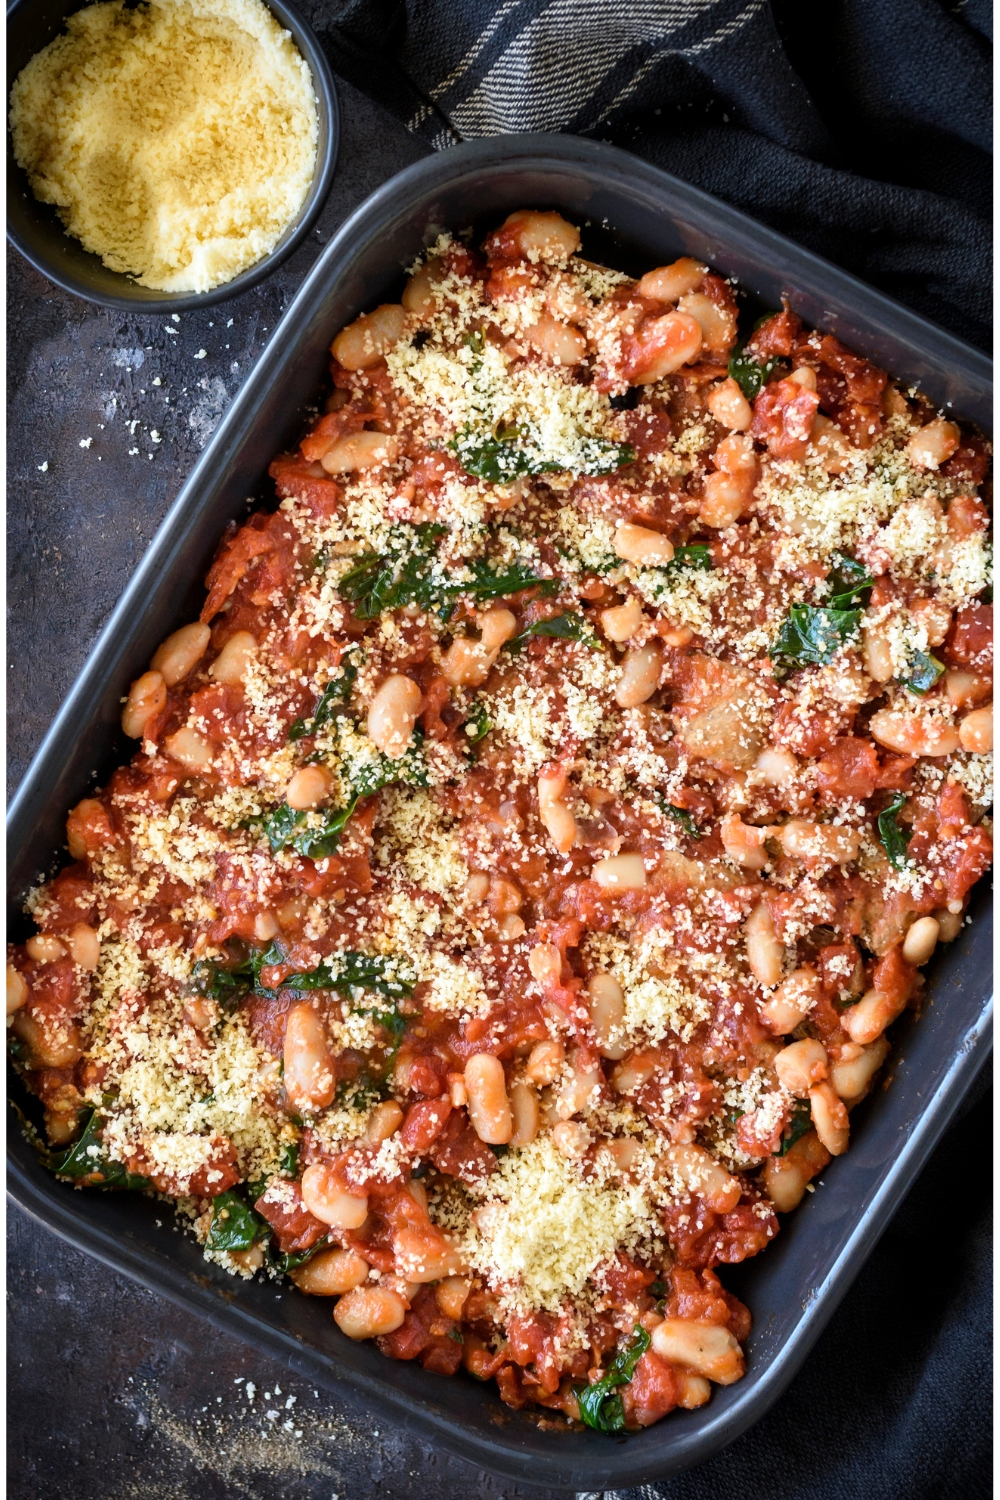 A baking dish filled with tomato casserole covered in parmesan cheese.